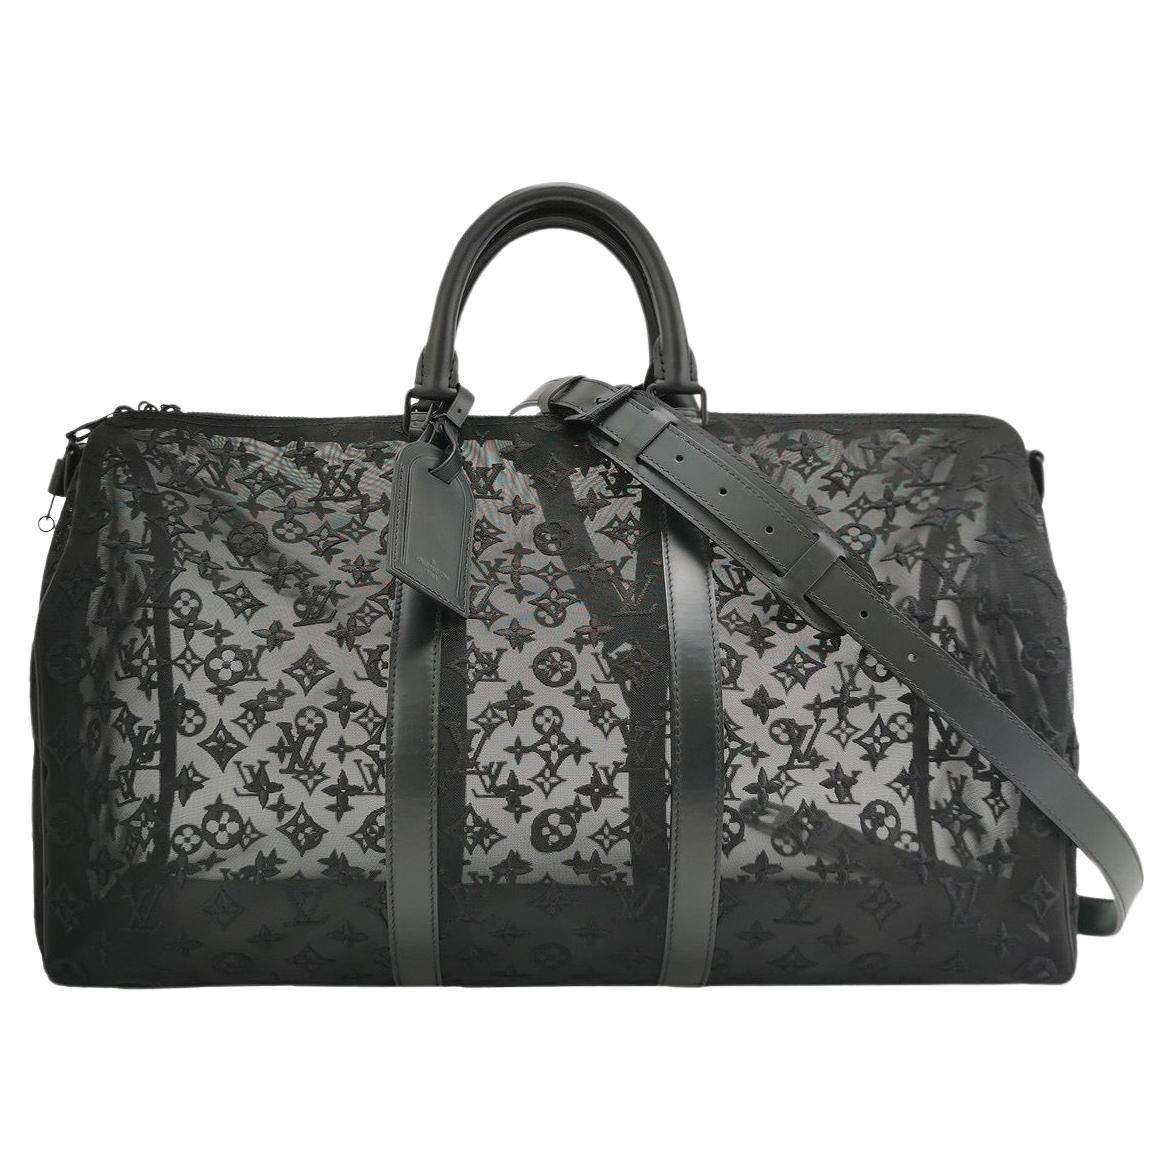 Can I monogram my Louis Vuitton after purchase?